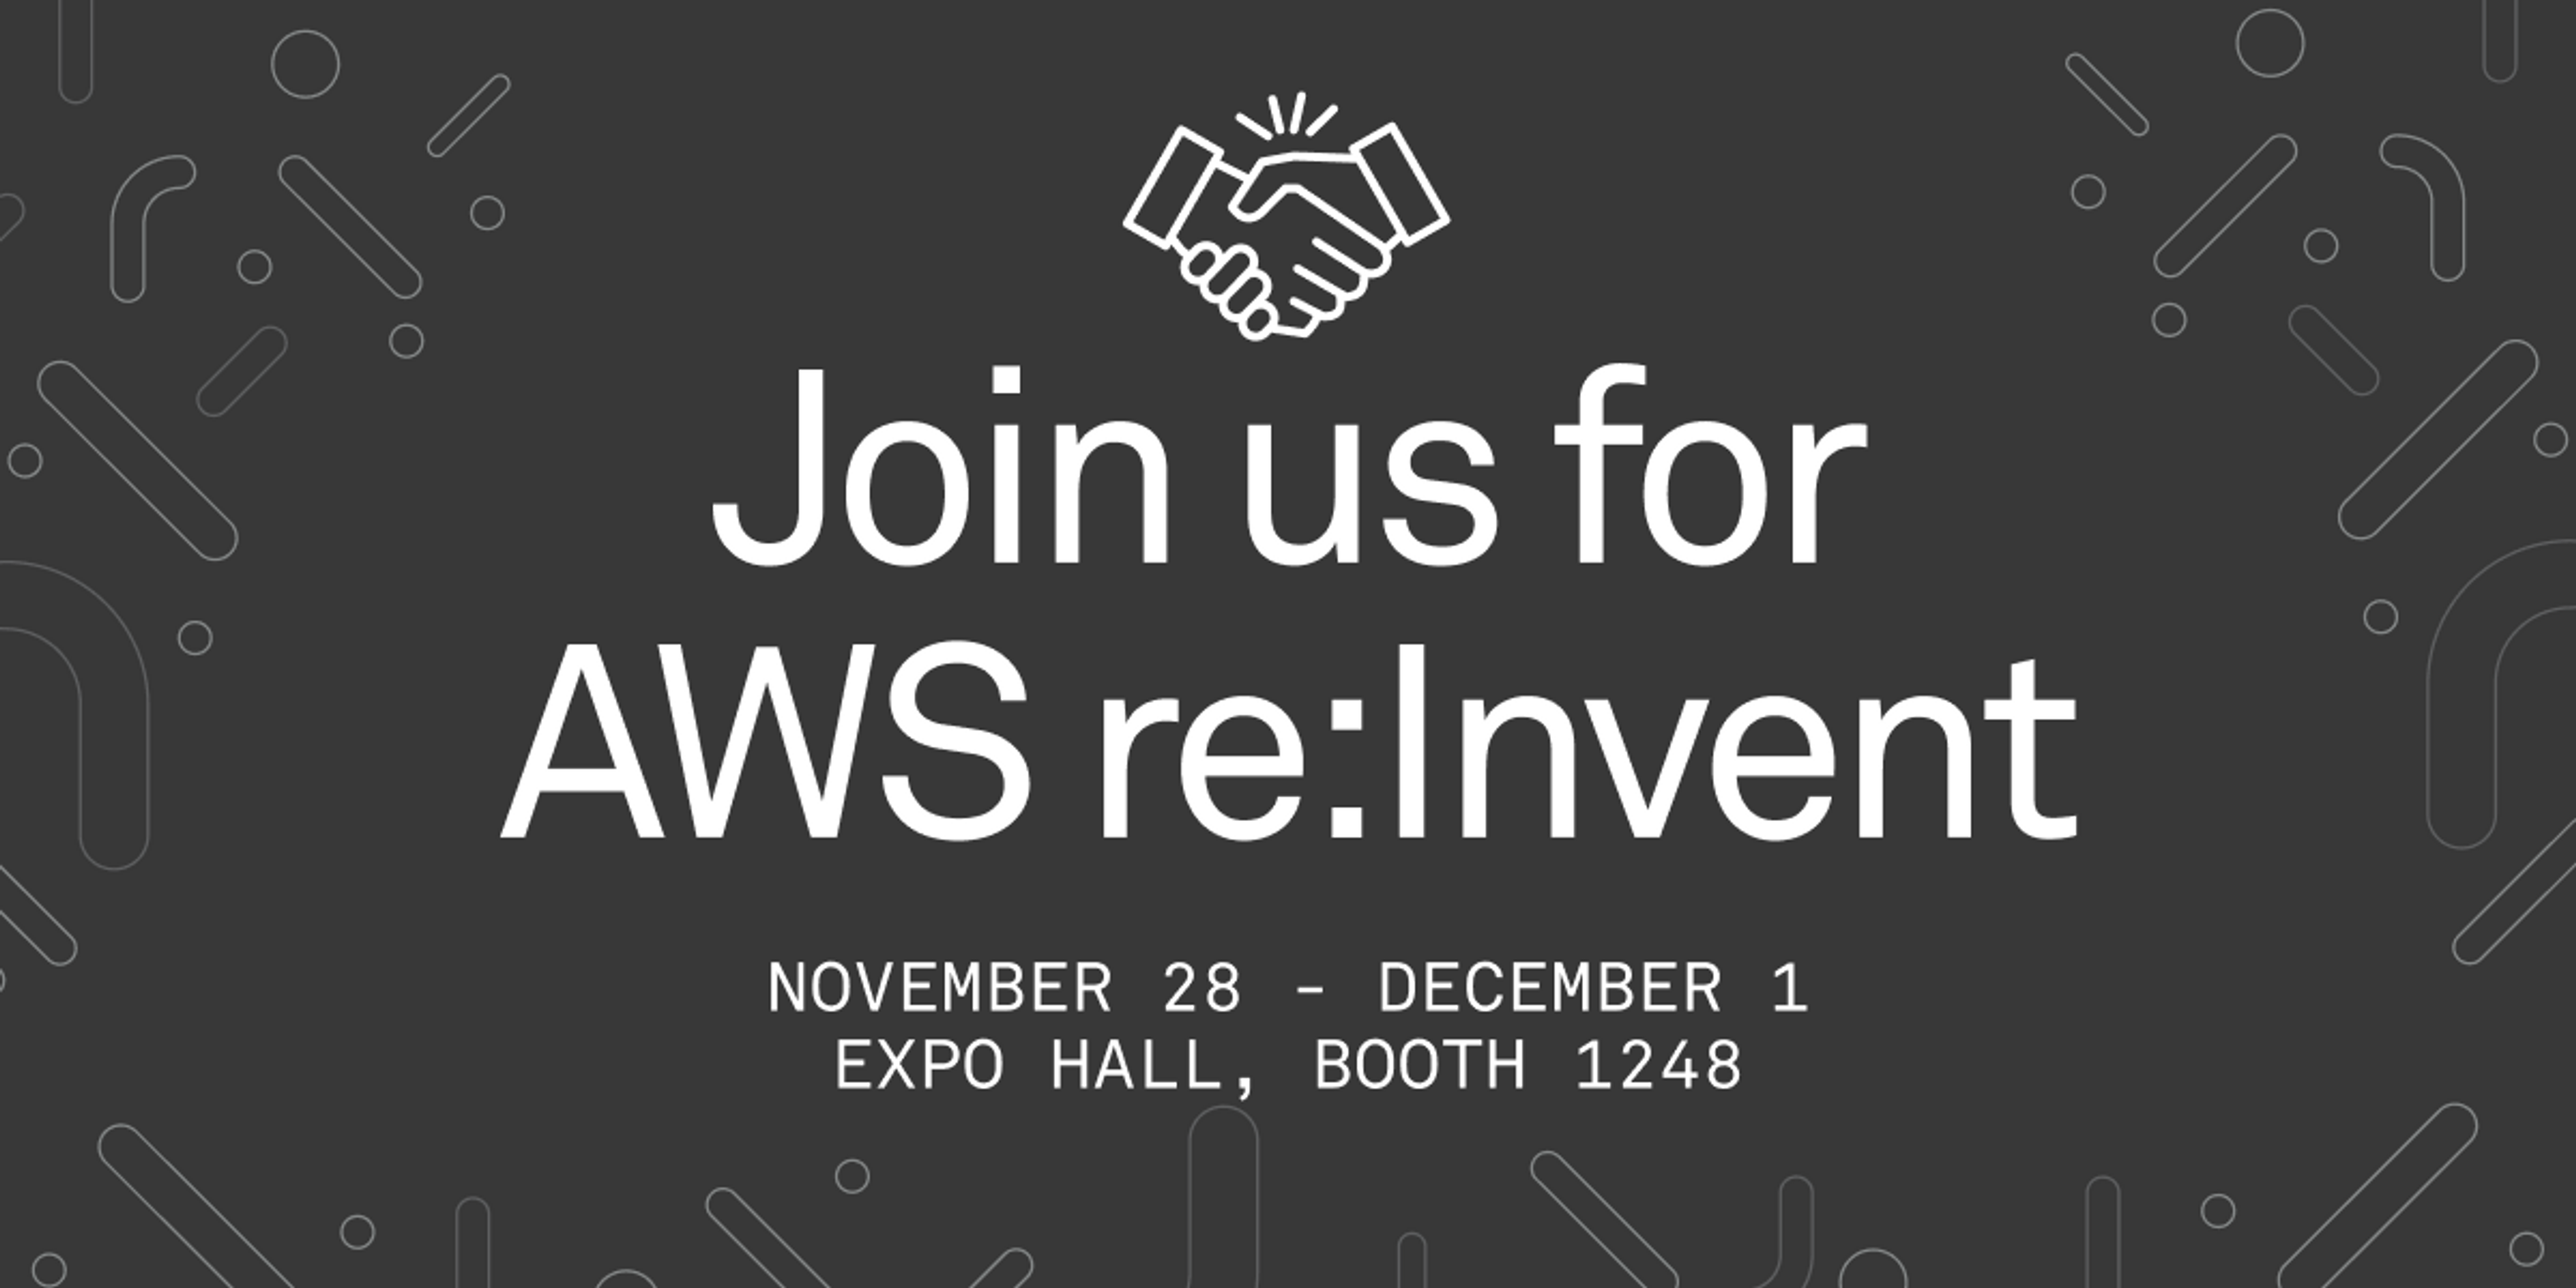 White text on a black background saying Join us for AWS re:Invent, November 28 - December 1, Expo Hall, Booth 1248